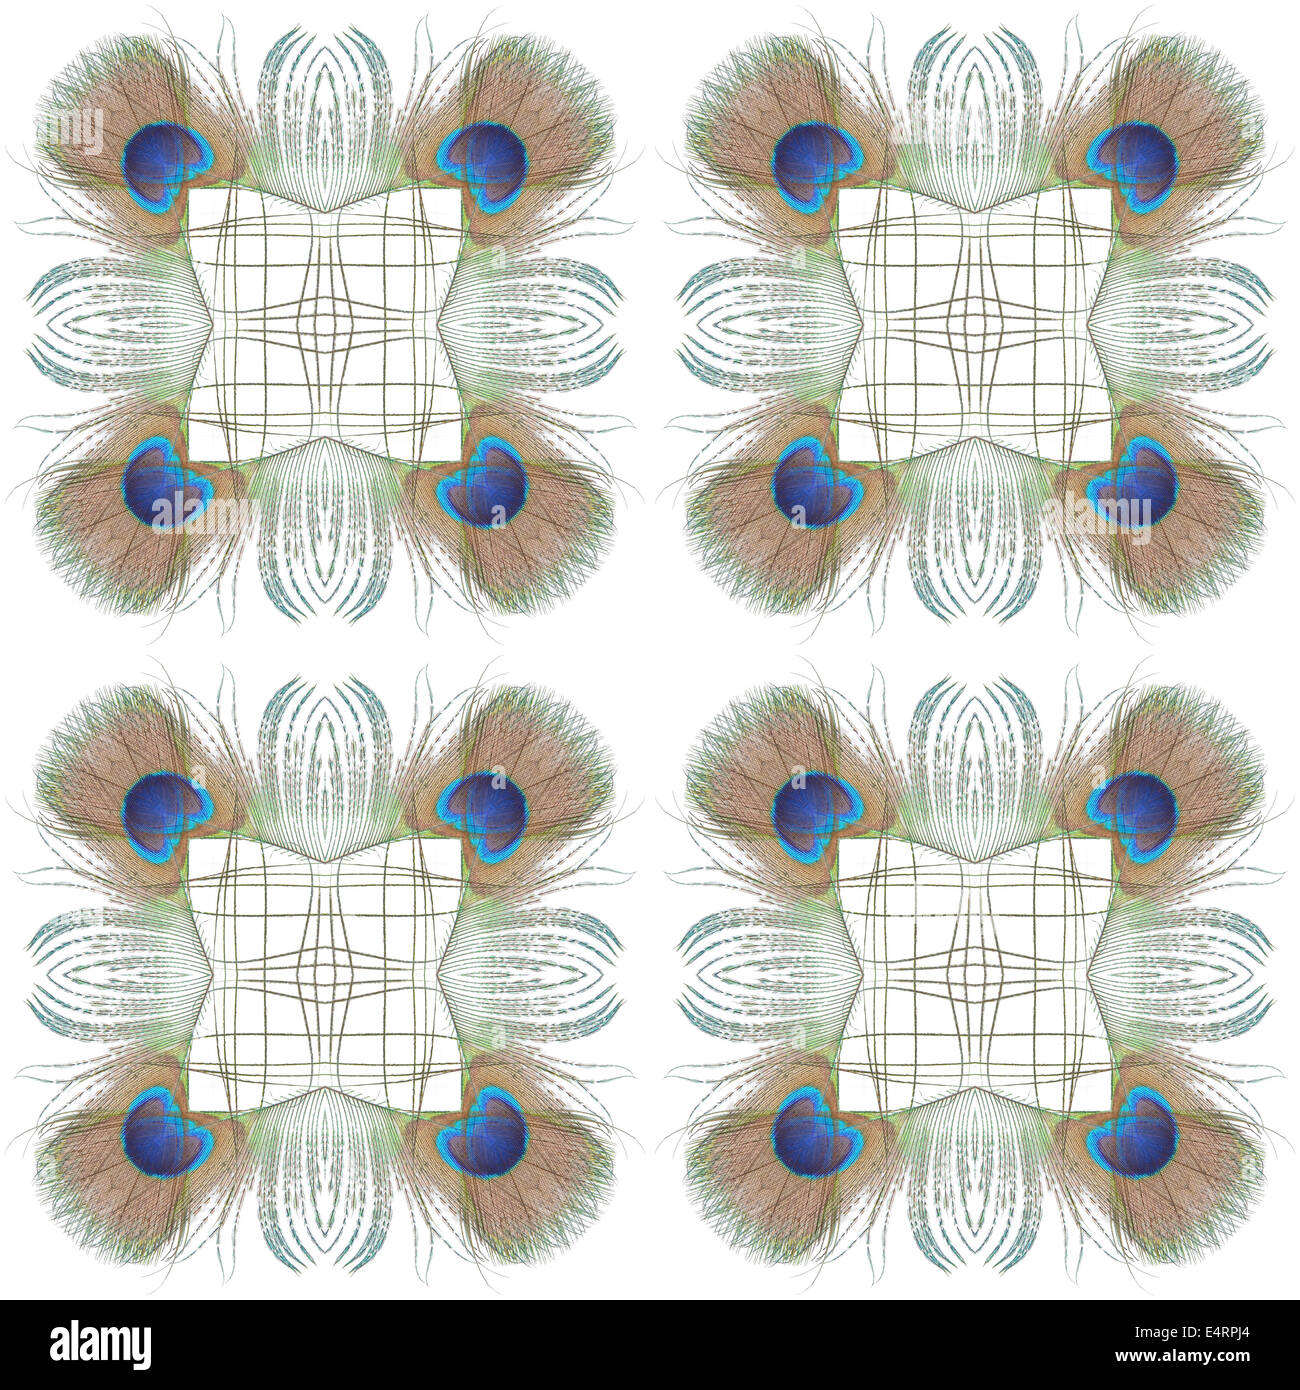 Beau vert Peacock feathers pattern abstract, isolé sur fond blanc Banque D'Images